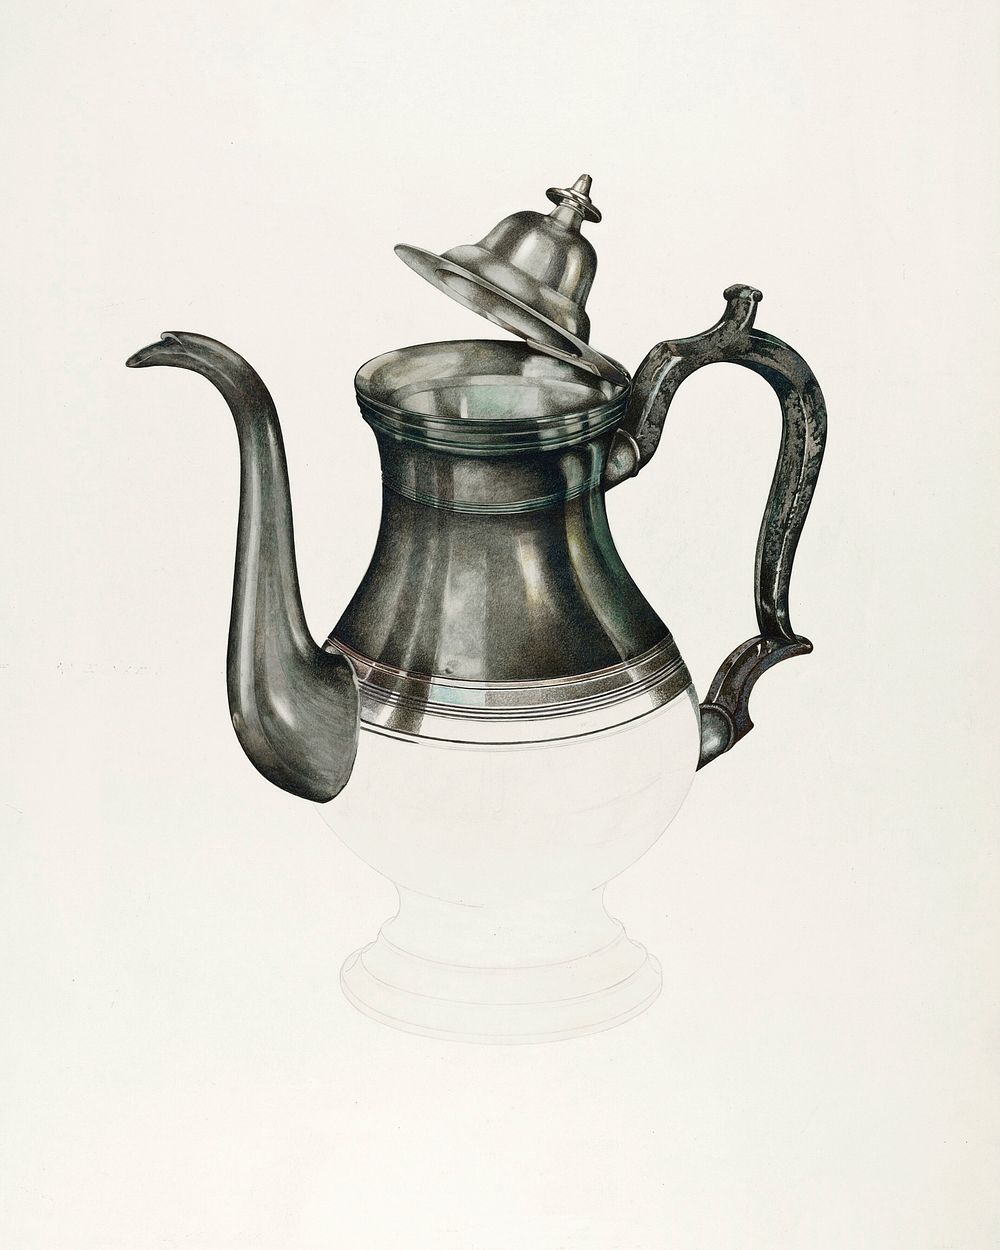 Coffee Pot (1935&ndash;1942) by John Thorsen. Original from The National Gallery of Art. Digitally enhanced by rawpixel.